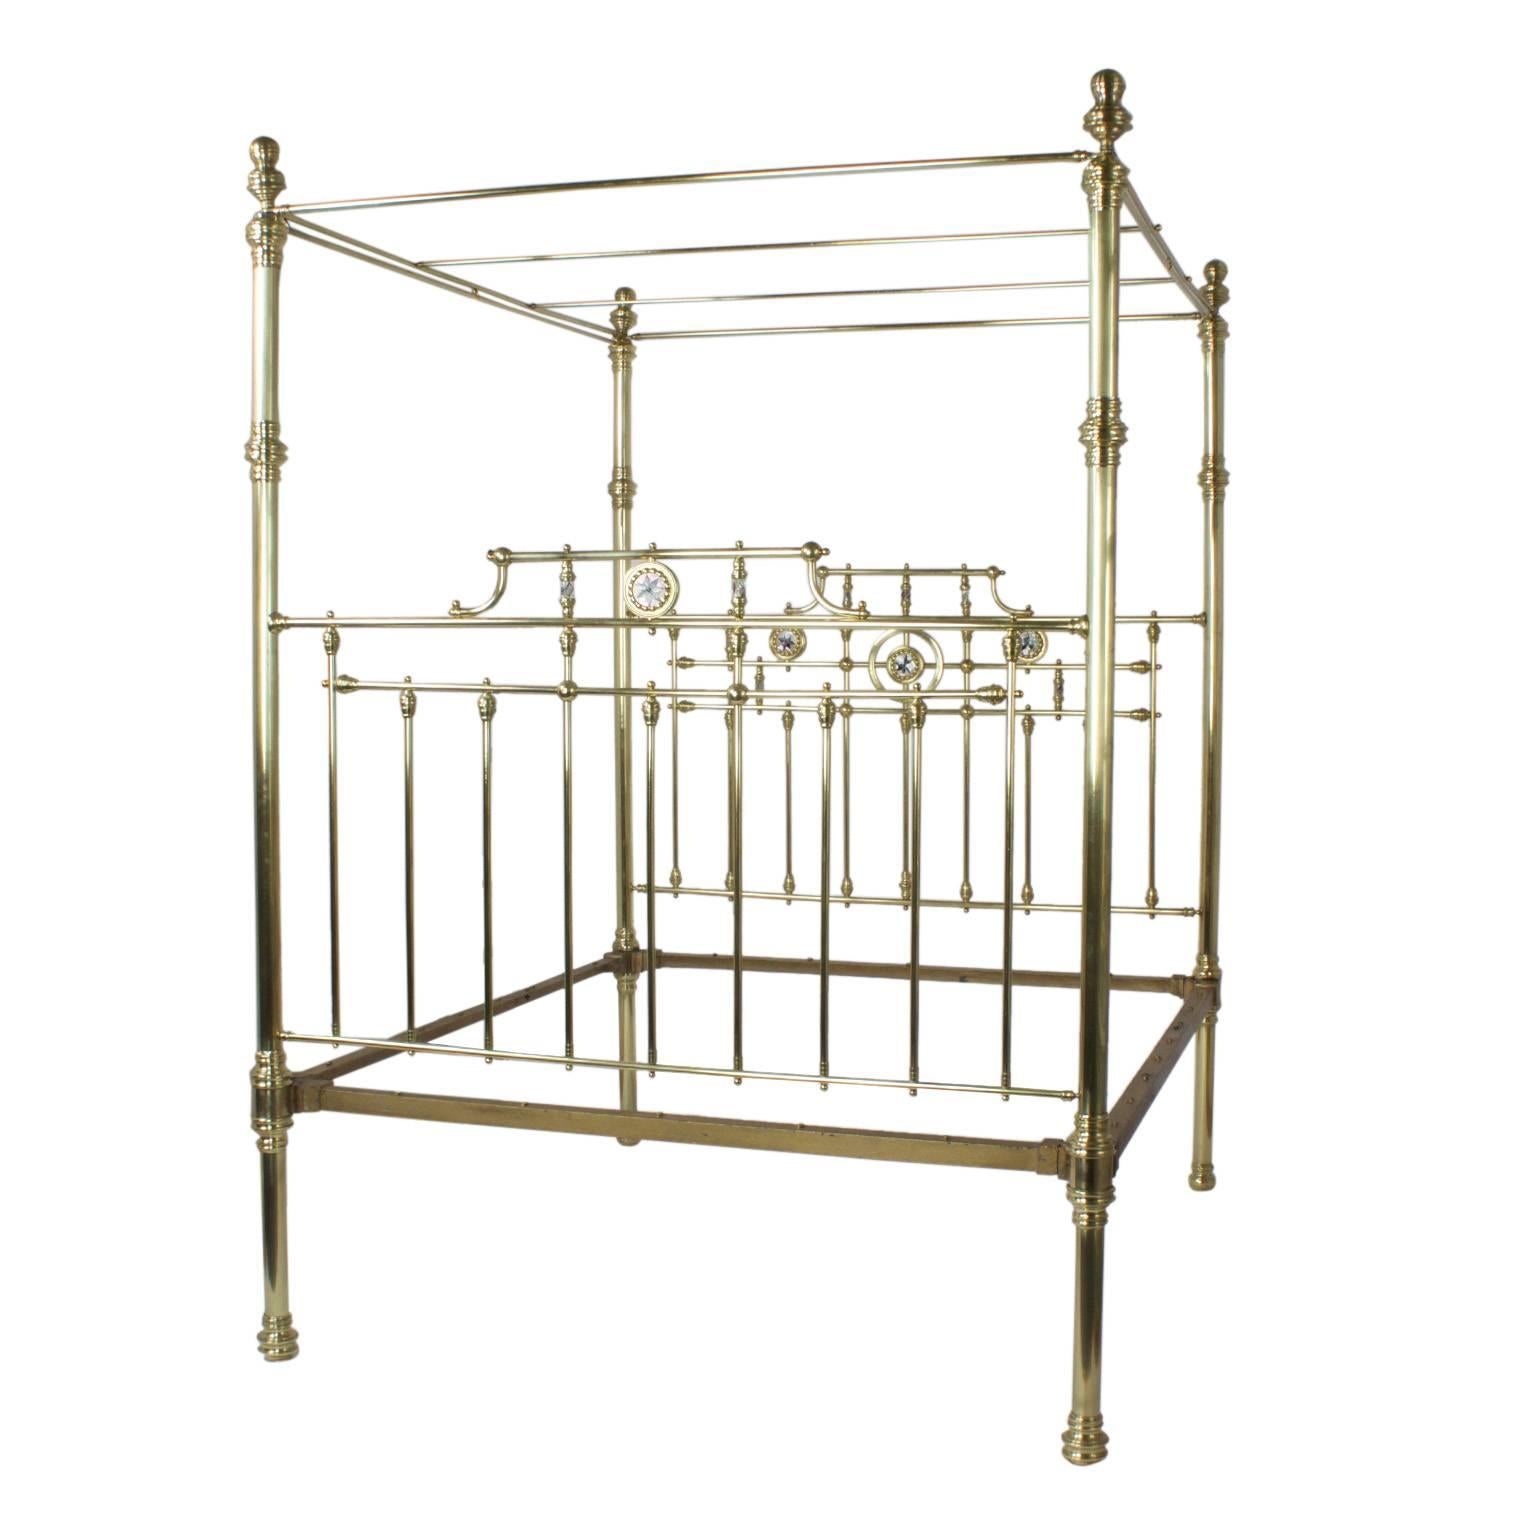 Inspired, bold antique super queen size English brass bed or daybed with an optional side panel. This luxurious bed features side curtain rods, mother of pearl medallions on the head and foot board, and over a century of history. Hand polished and